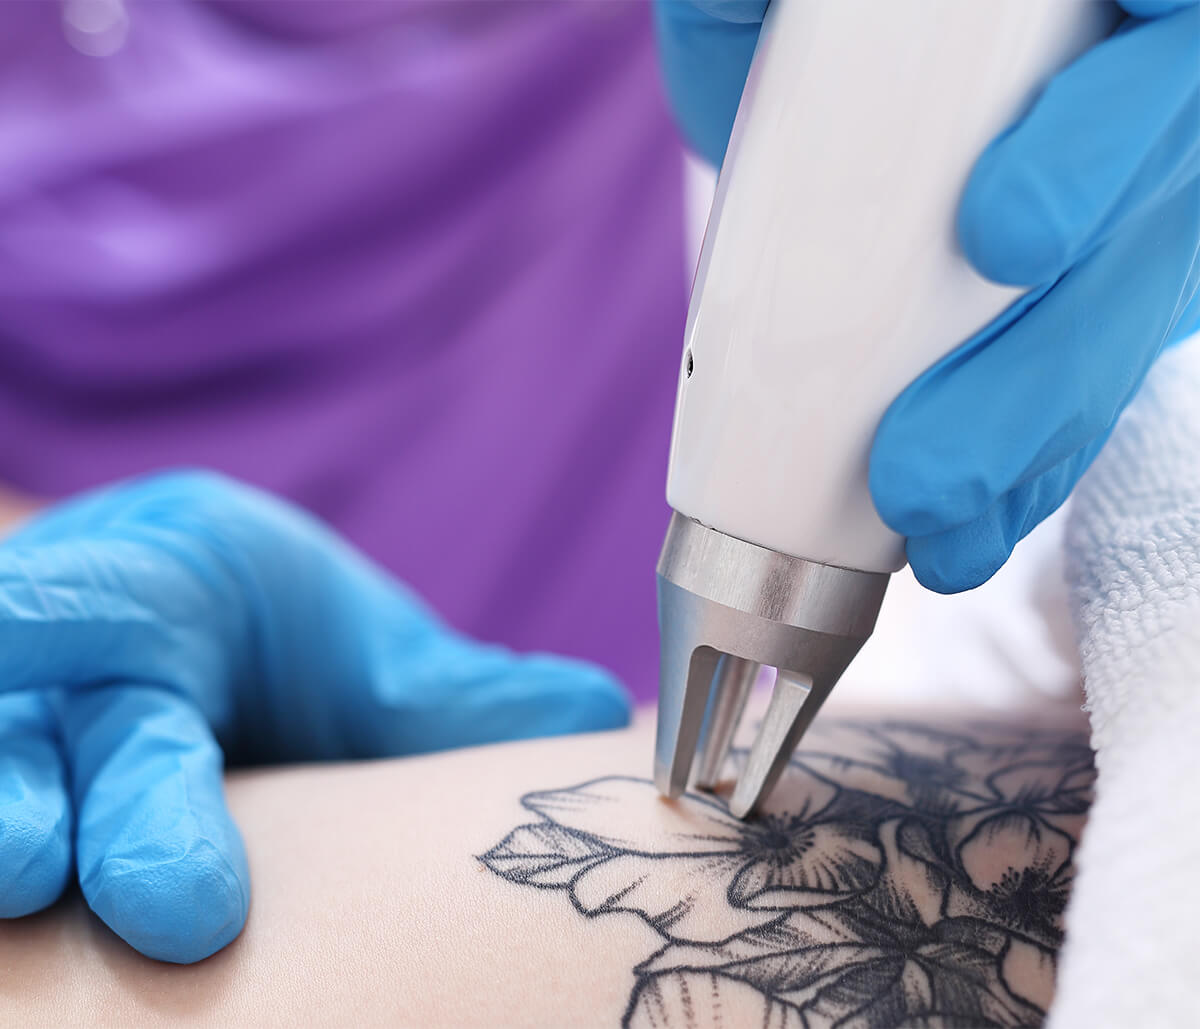 Tattoo Removal Pricing From $150 | NEW $197 FLAT FEE ❤️